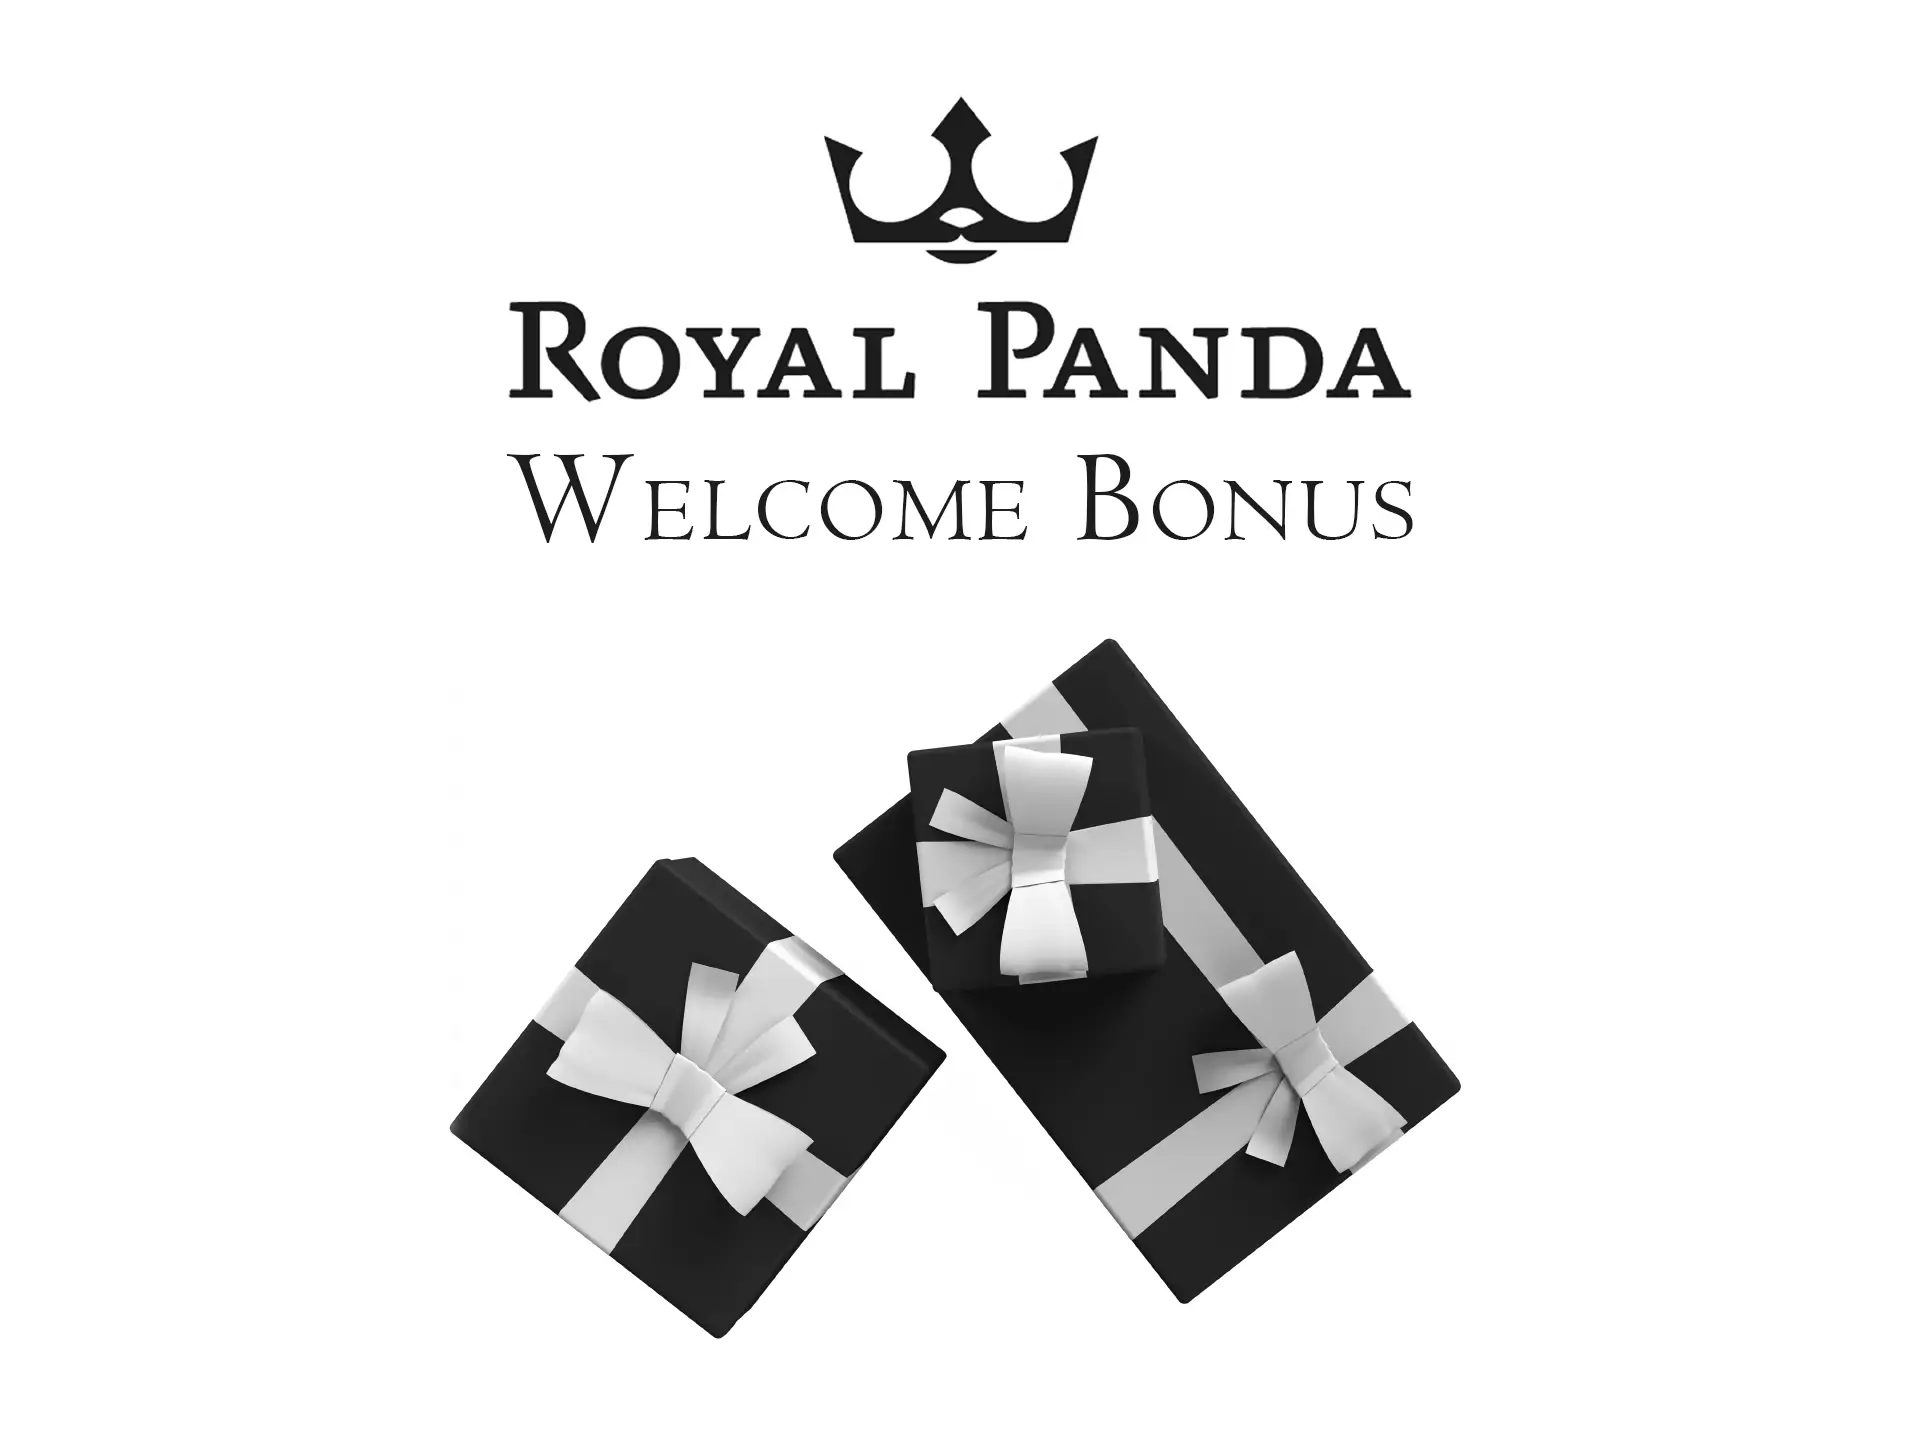 Don't forget to receive a welcome bonus.